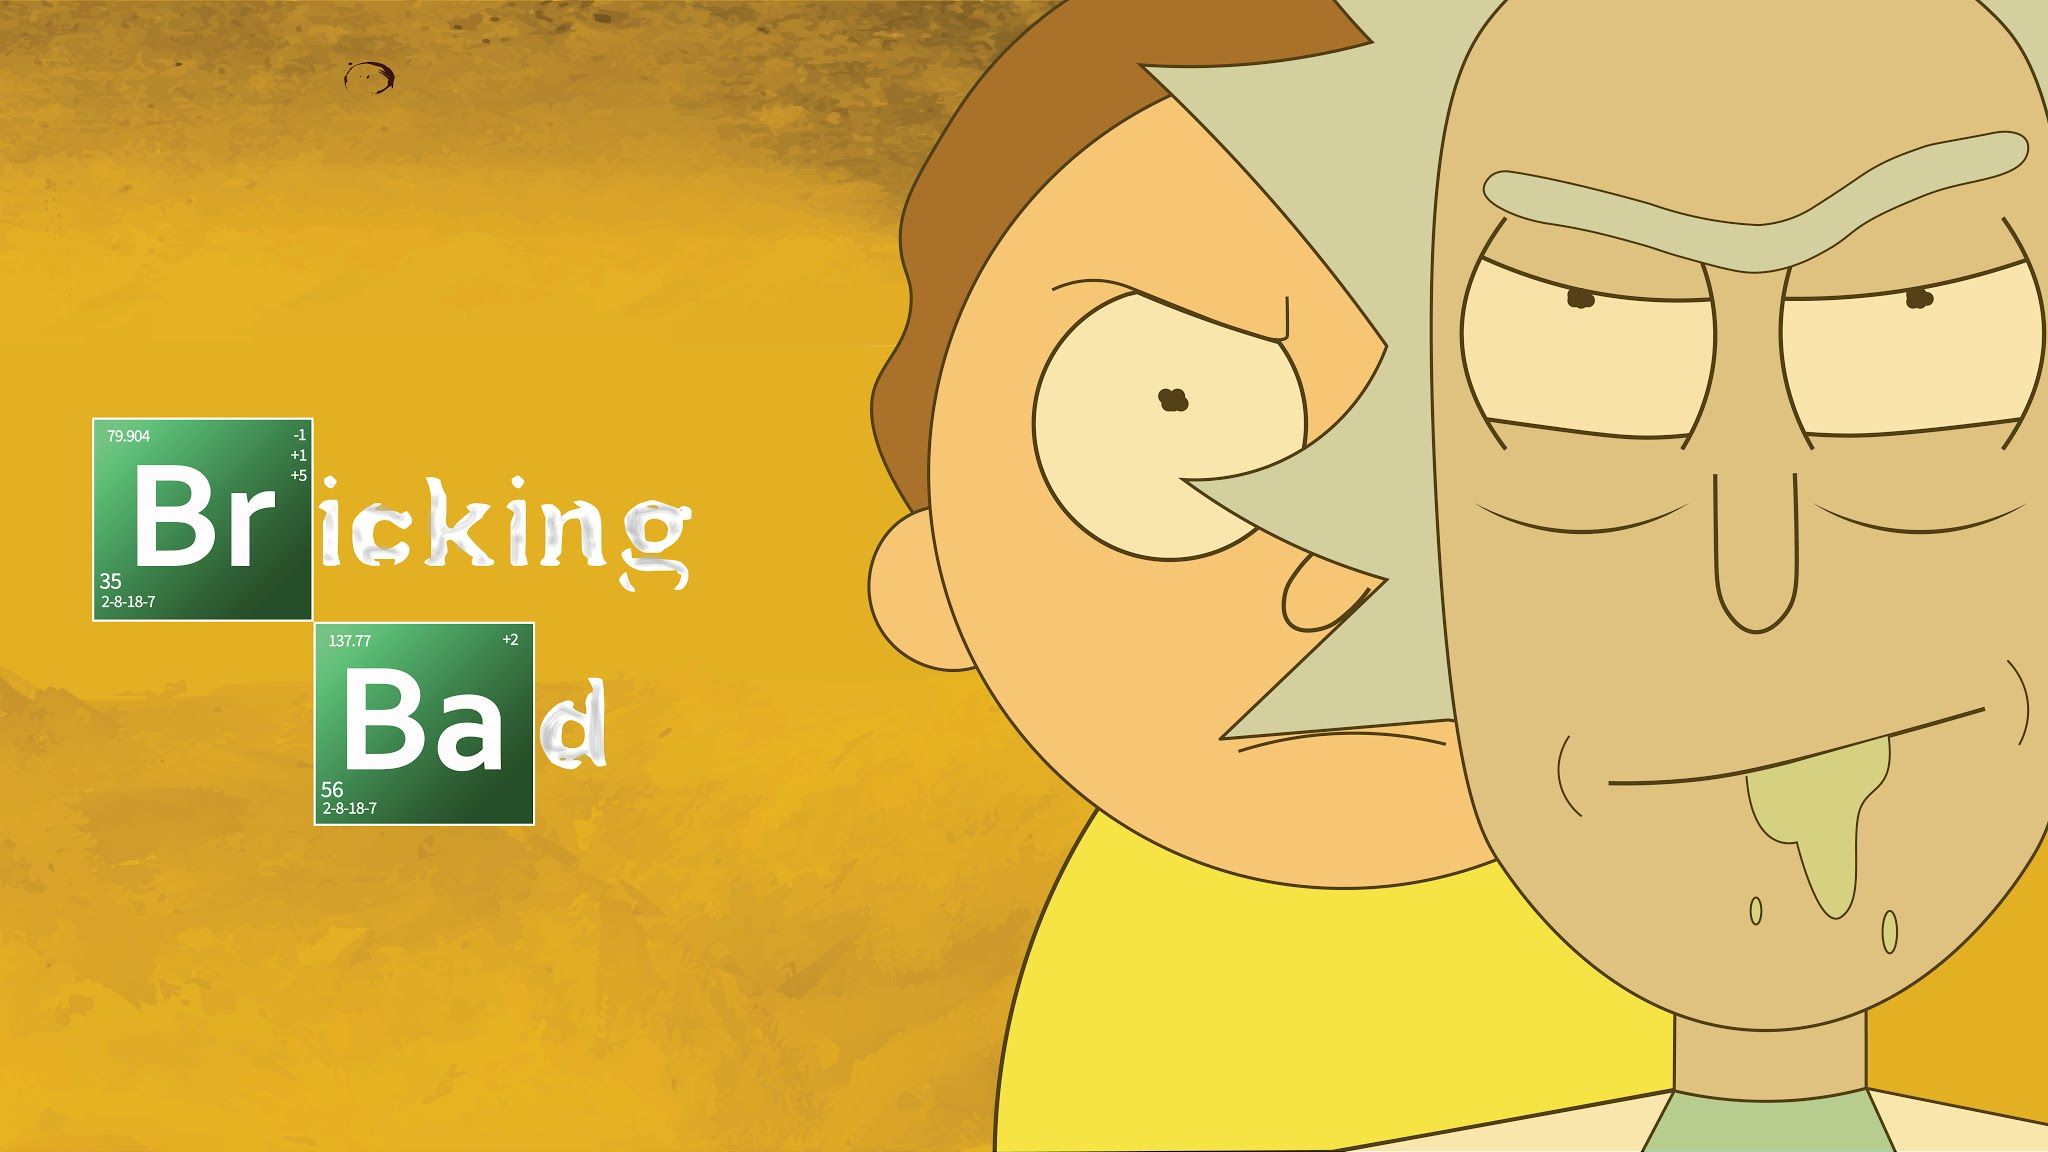 Rick And Morty Breaking Bad Wallpapers - Wallpaper Cave